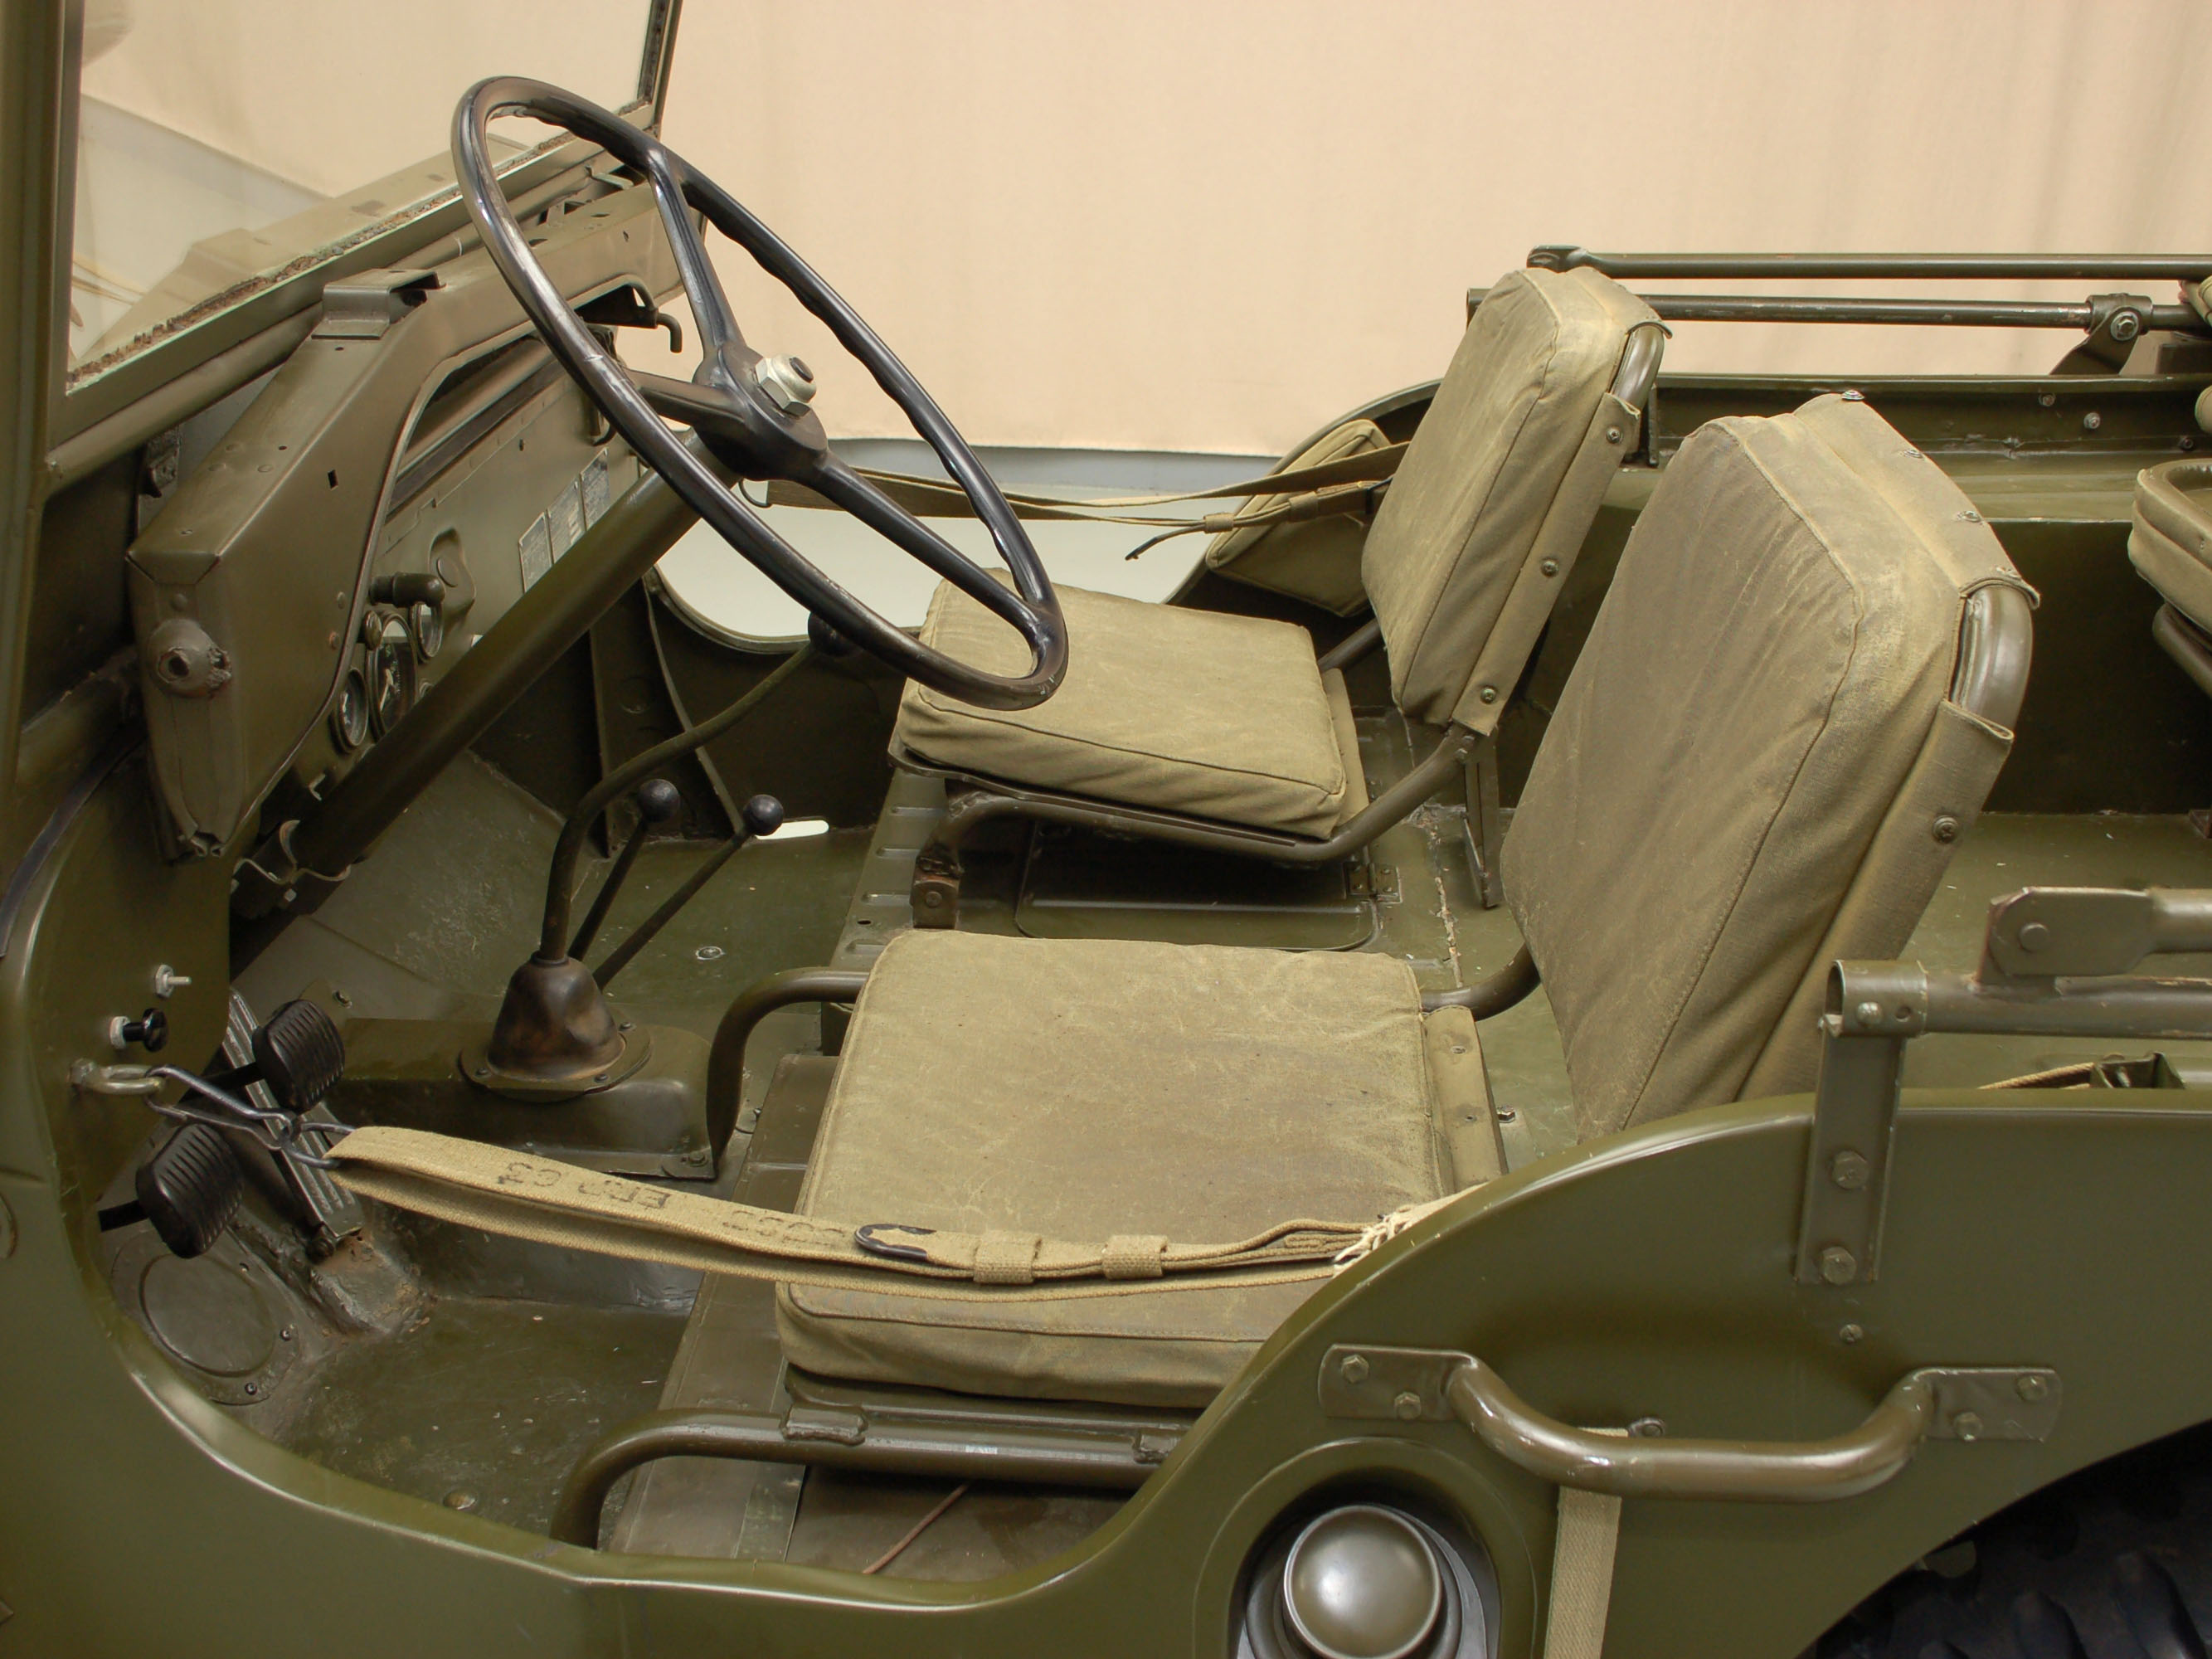 1944 willys-overland mb (jeep) 1/4 ton